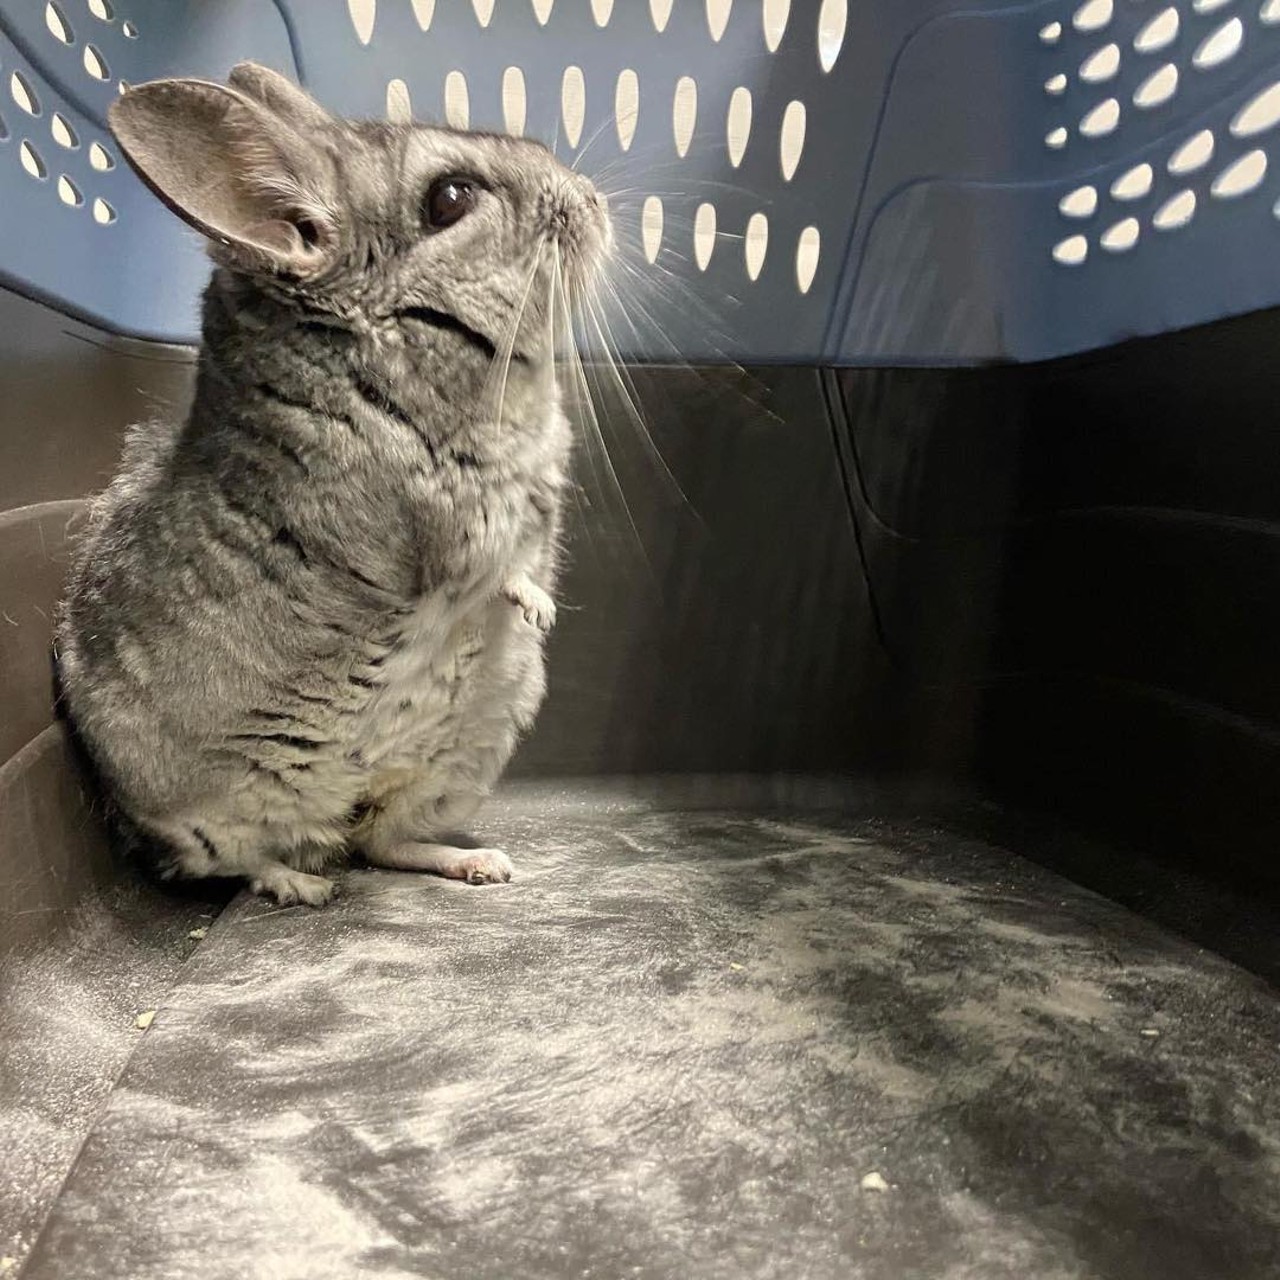 Morgan the chinchilla patiently awaiting her dust bath.